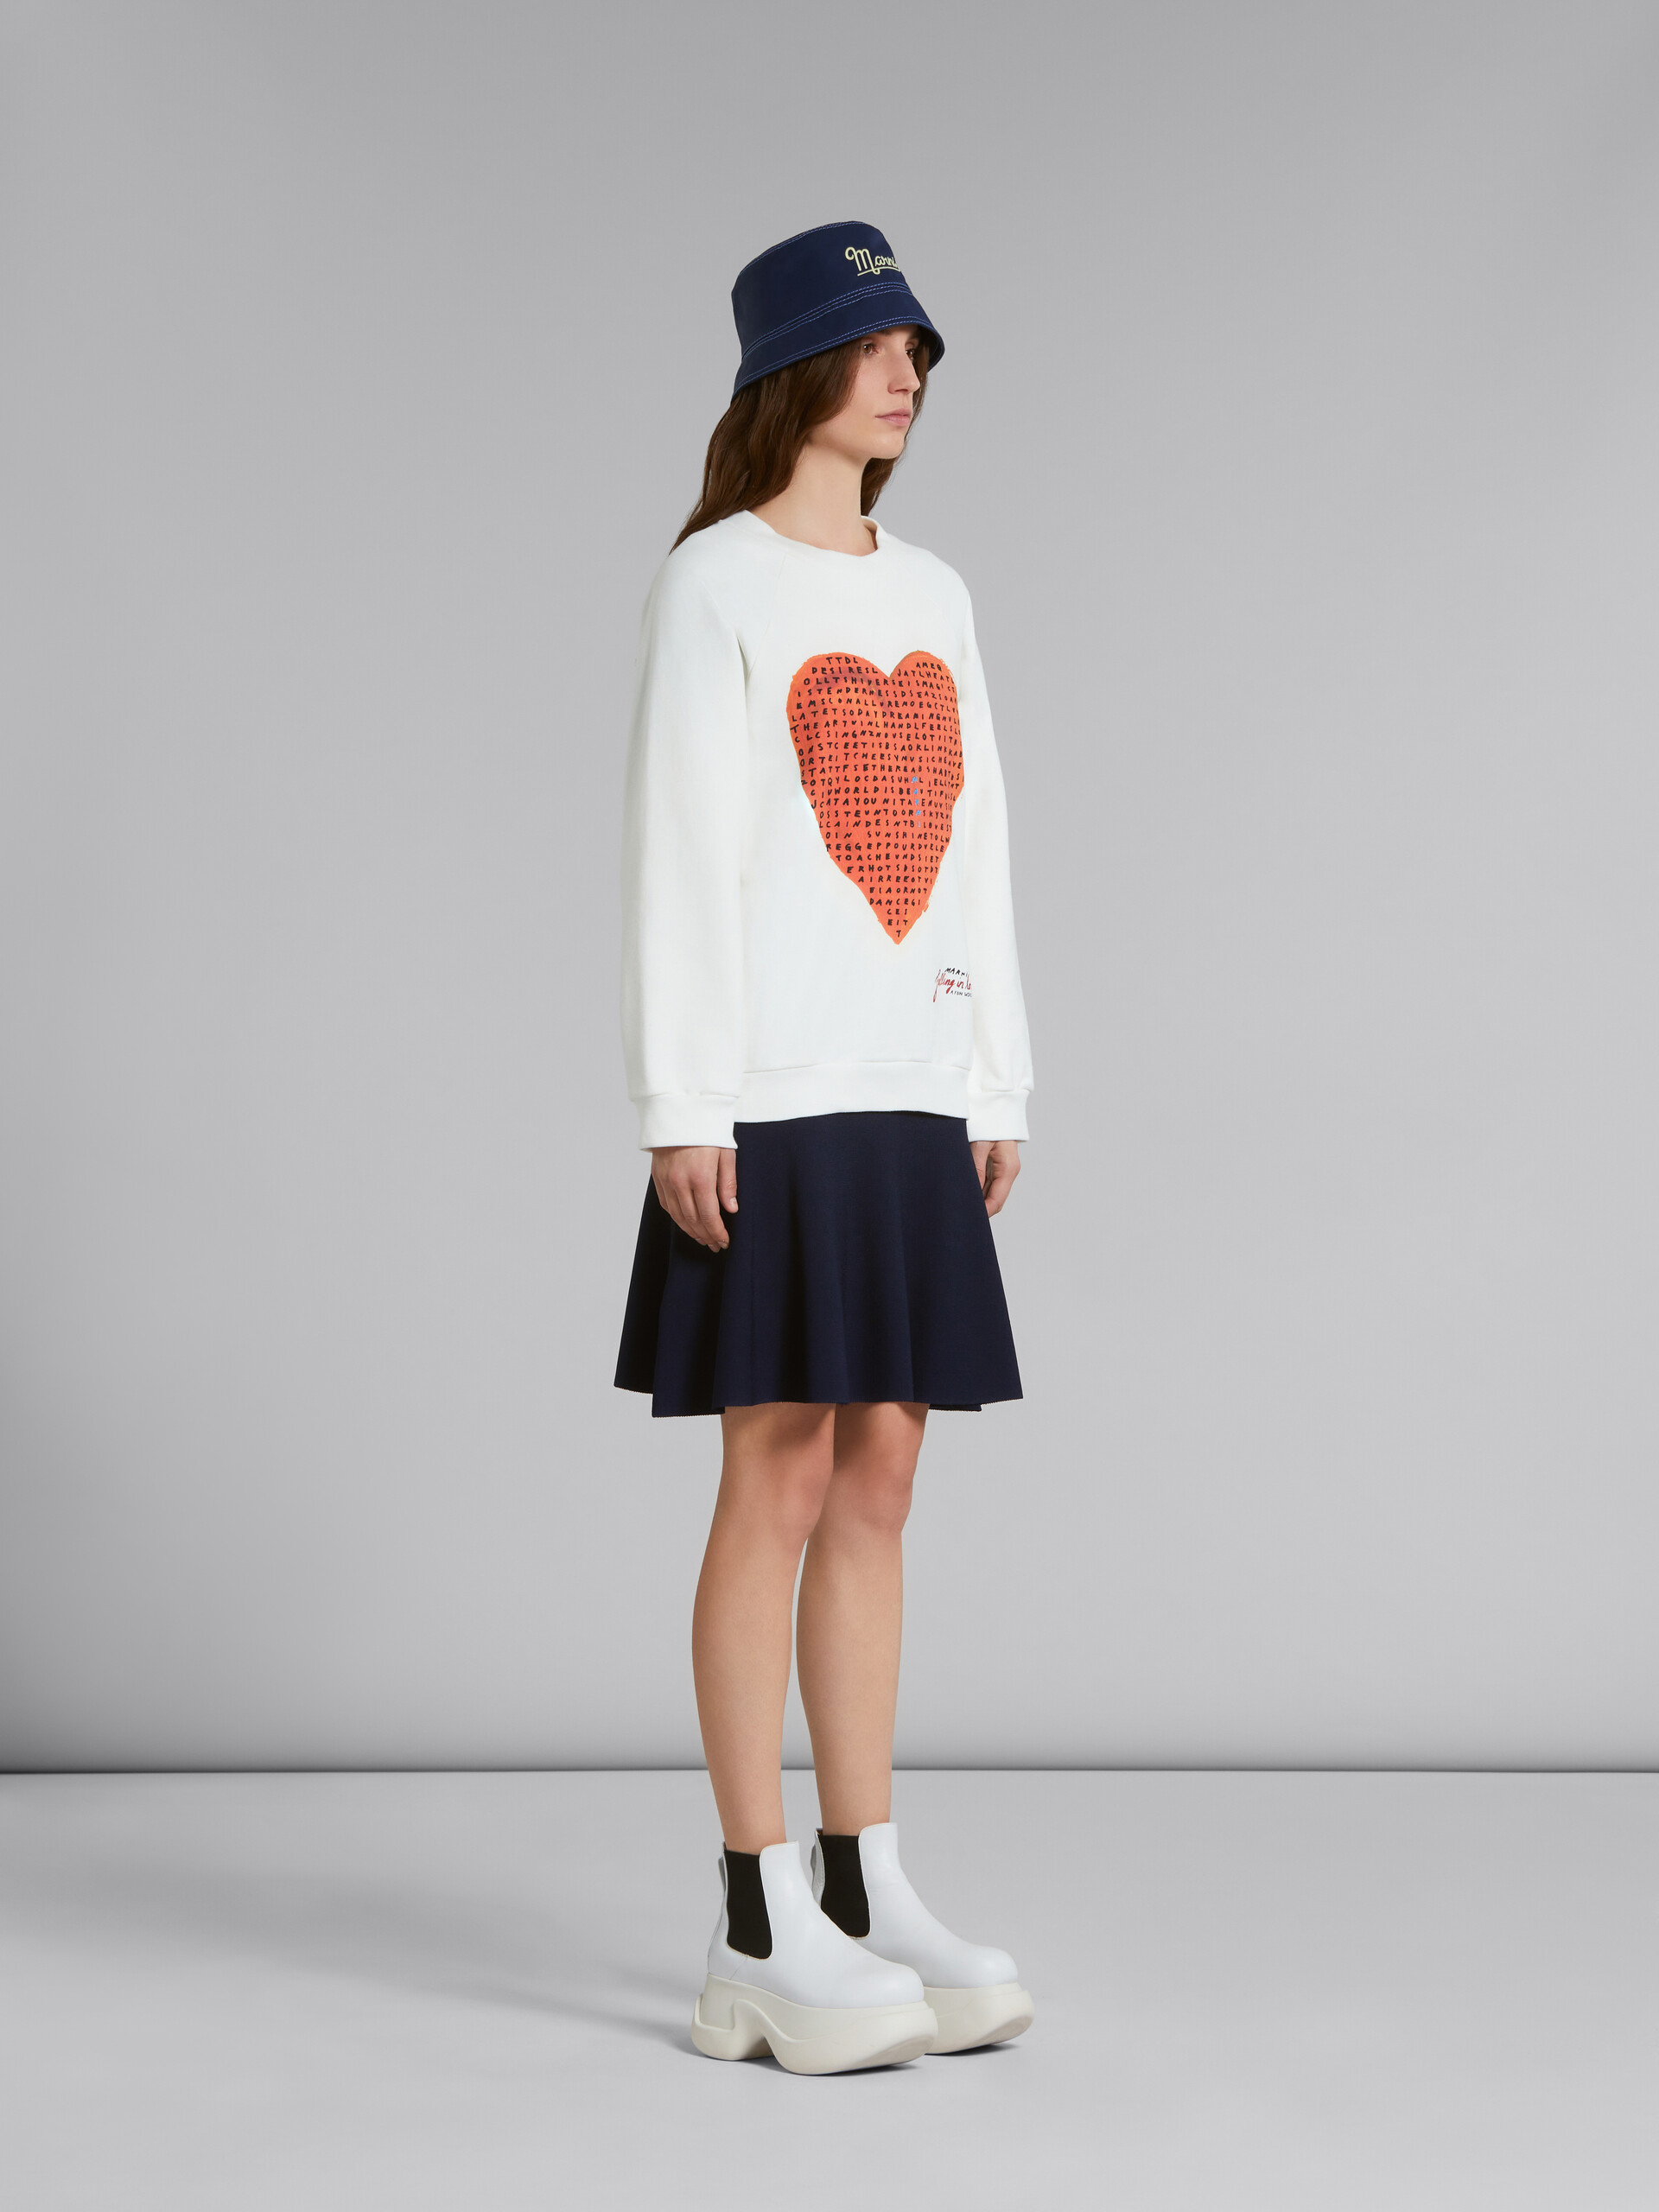 White sweatshirt with wordsearch heart print - Sweaters - Image 5